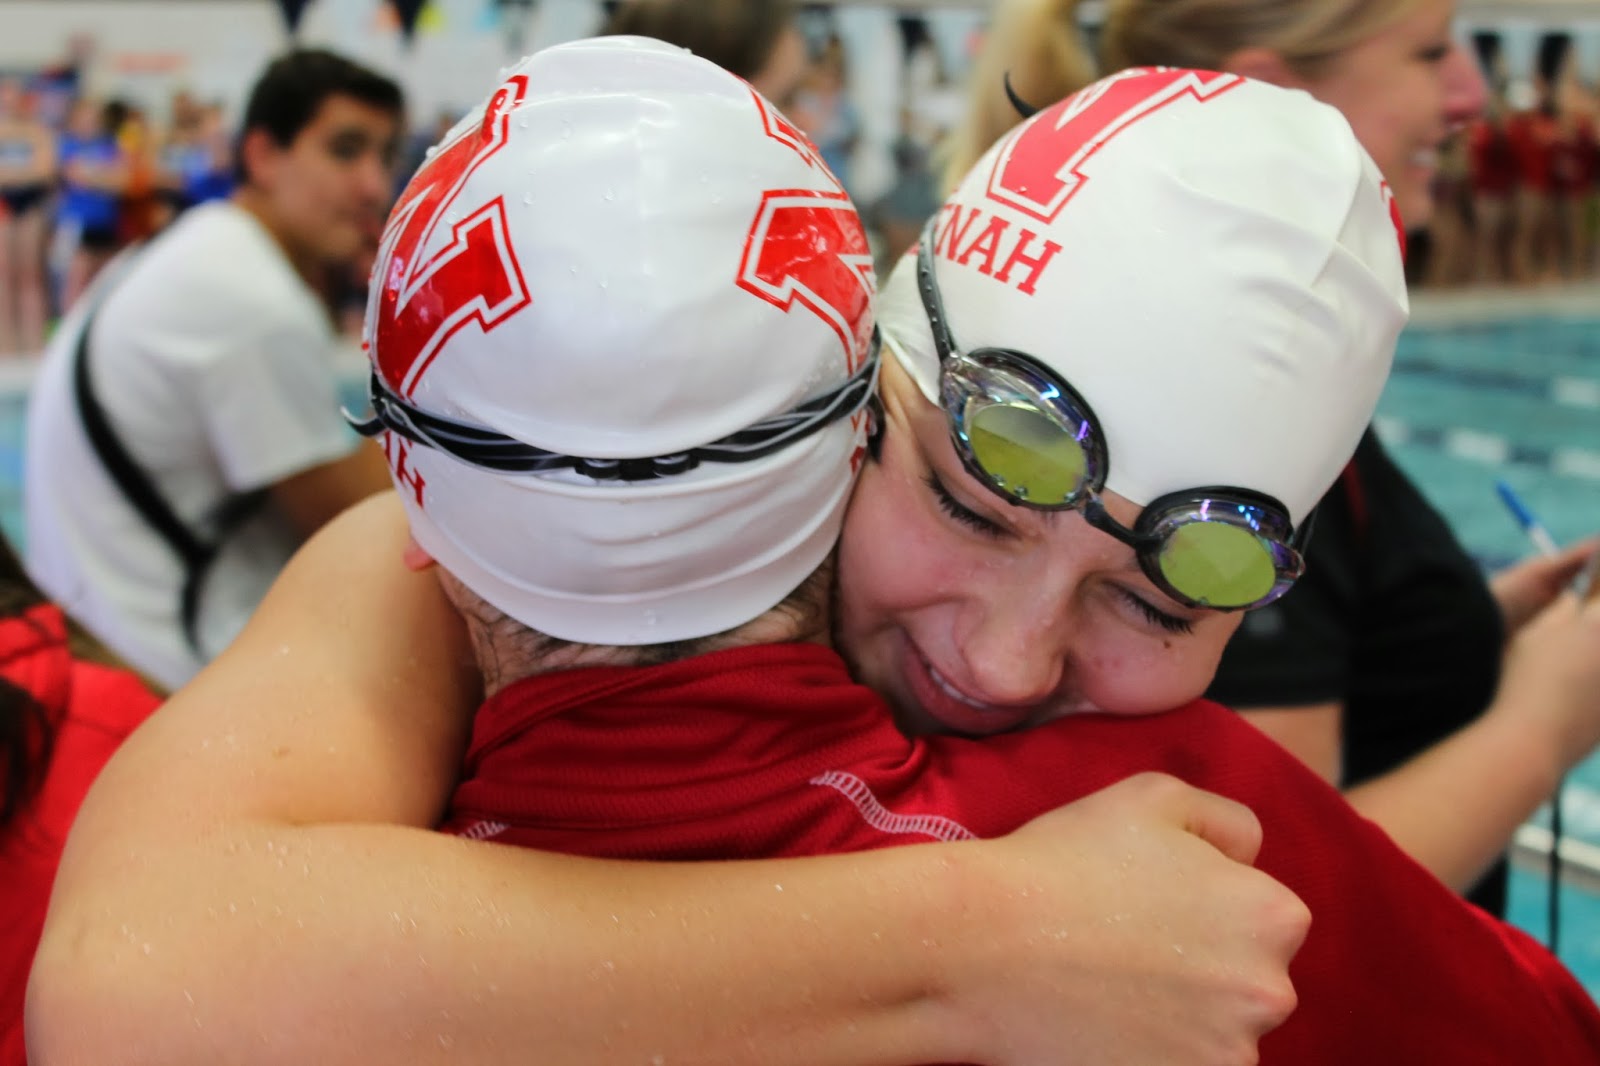 Nhs rocket swimming and diving team  scenes from the fva